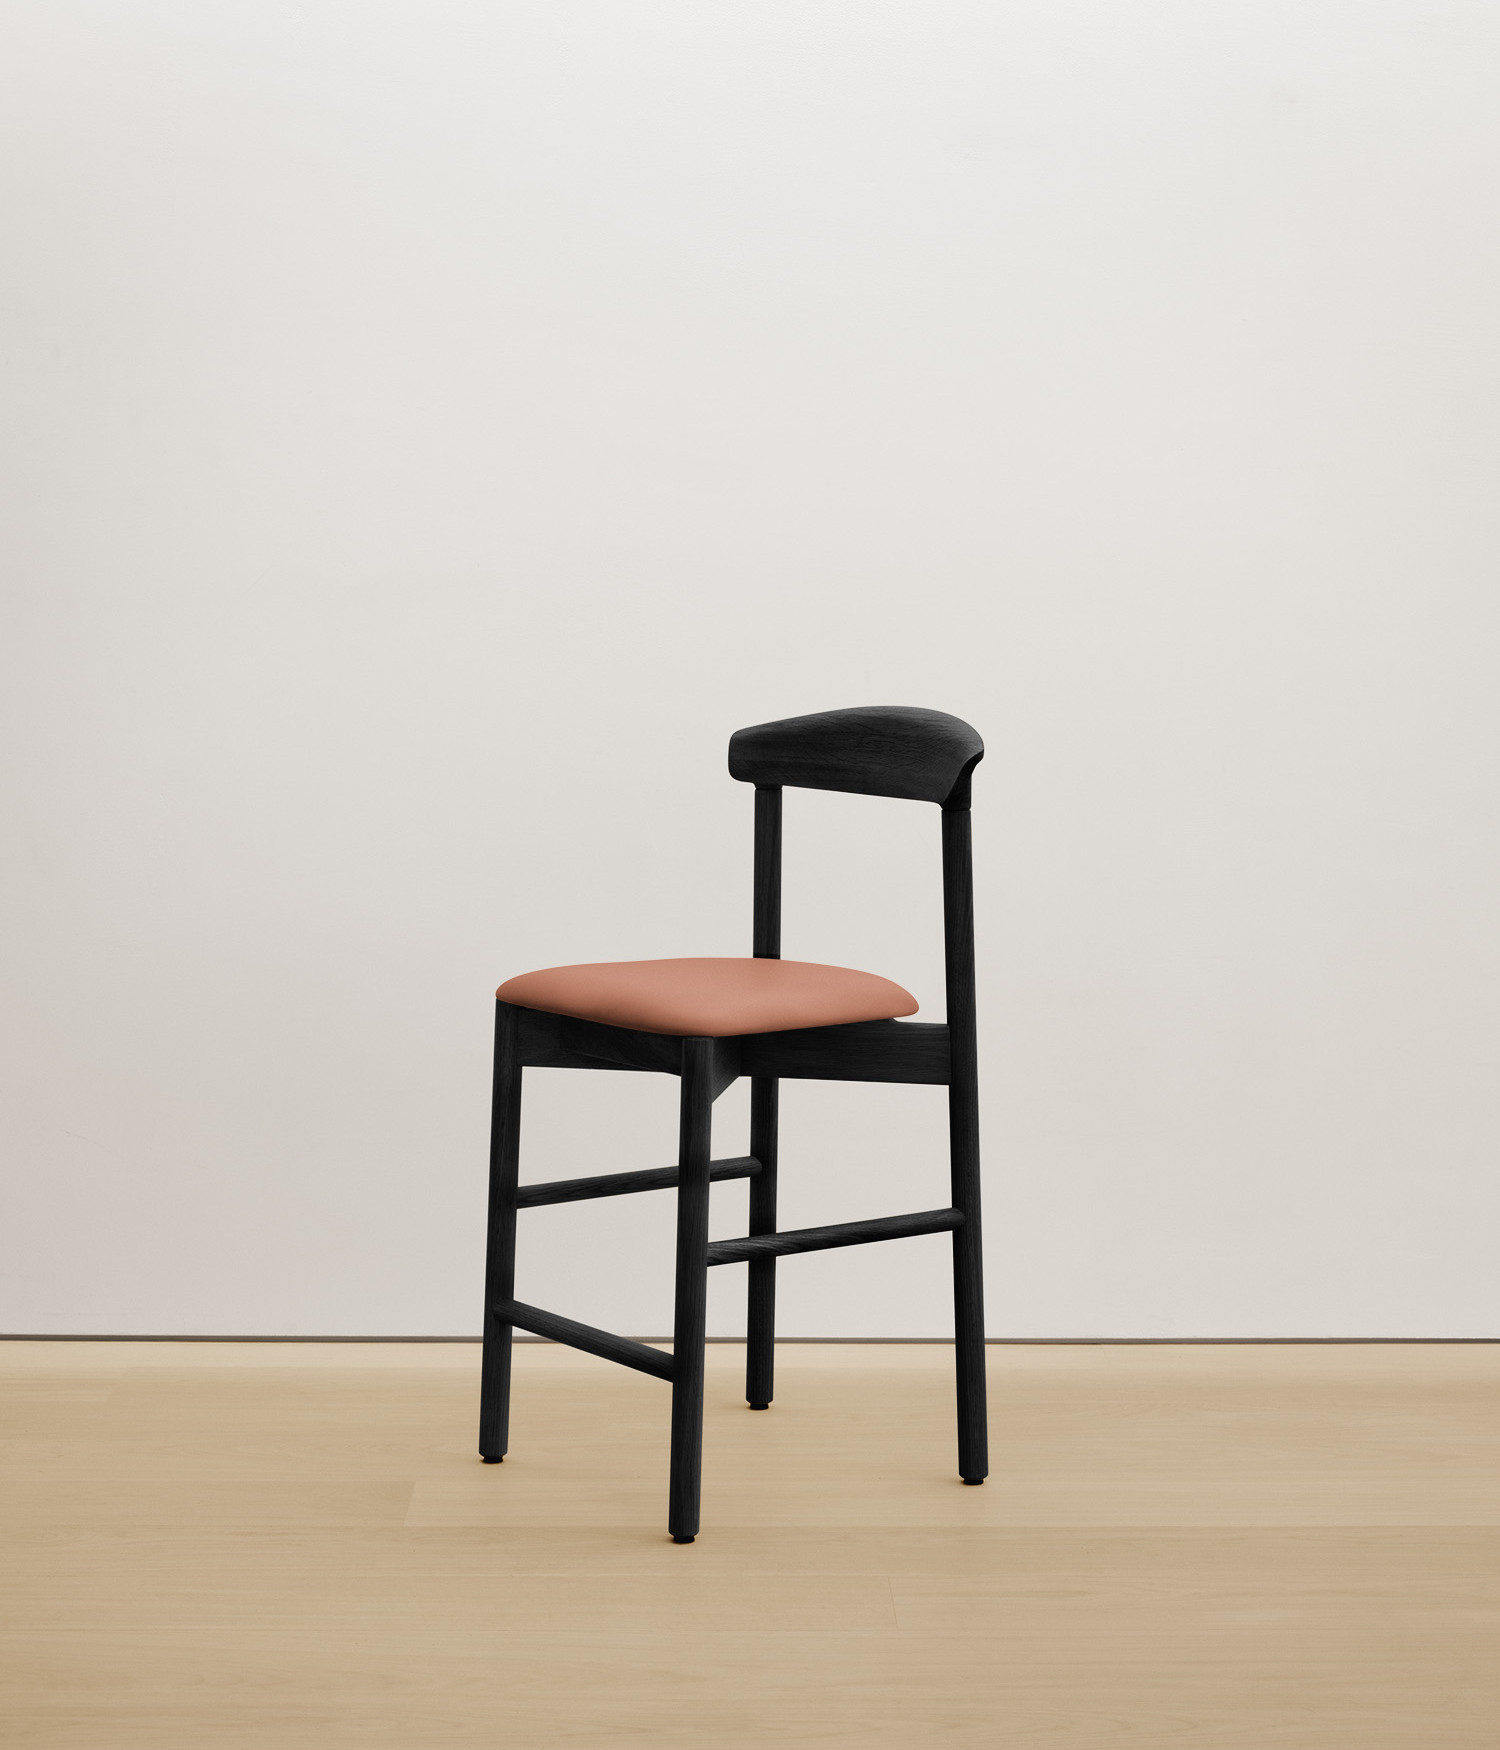  black-stained-oak stool with  color upholstered seat